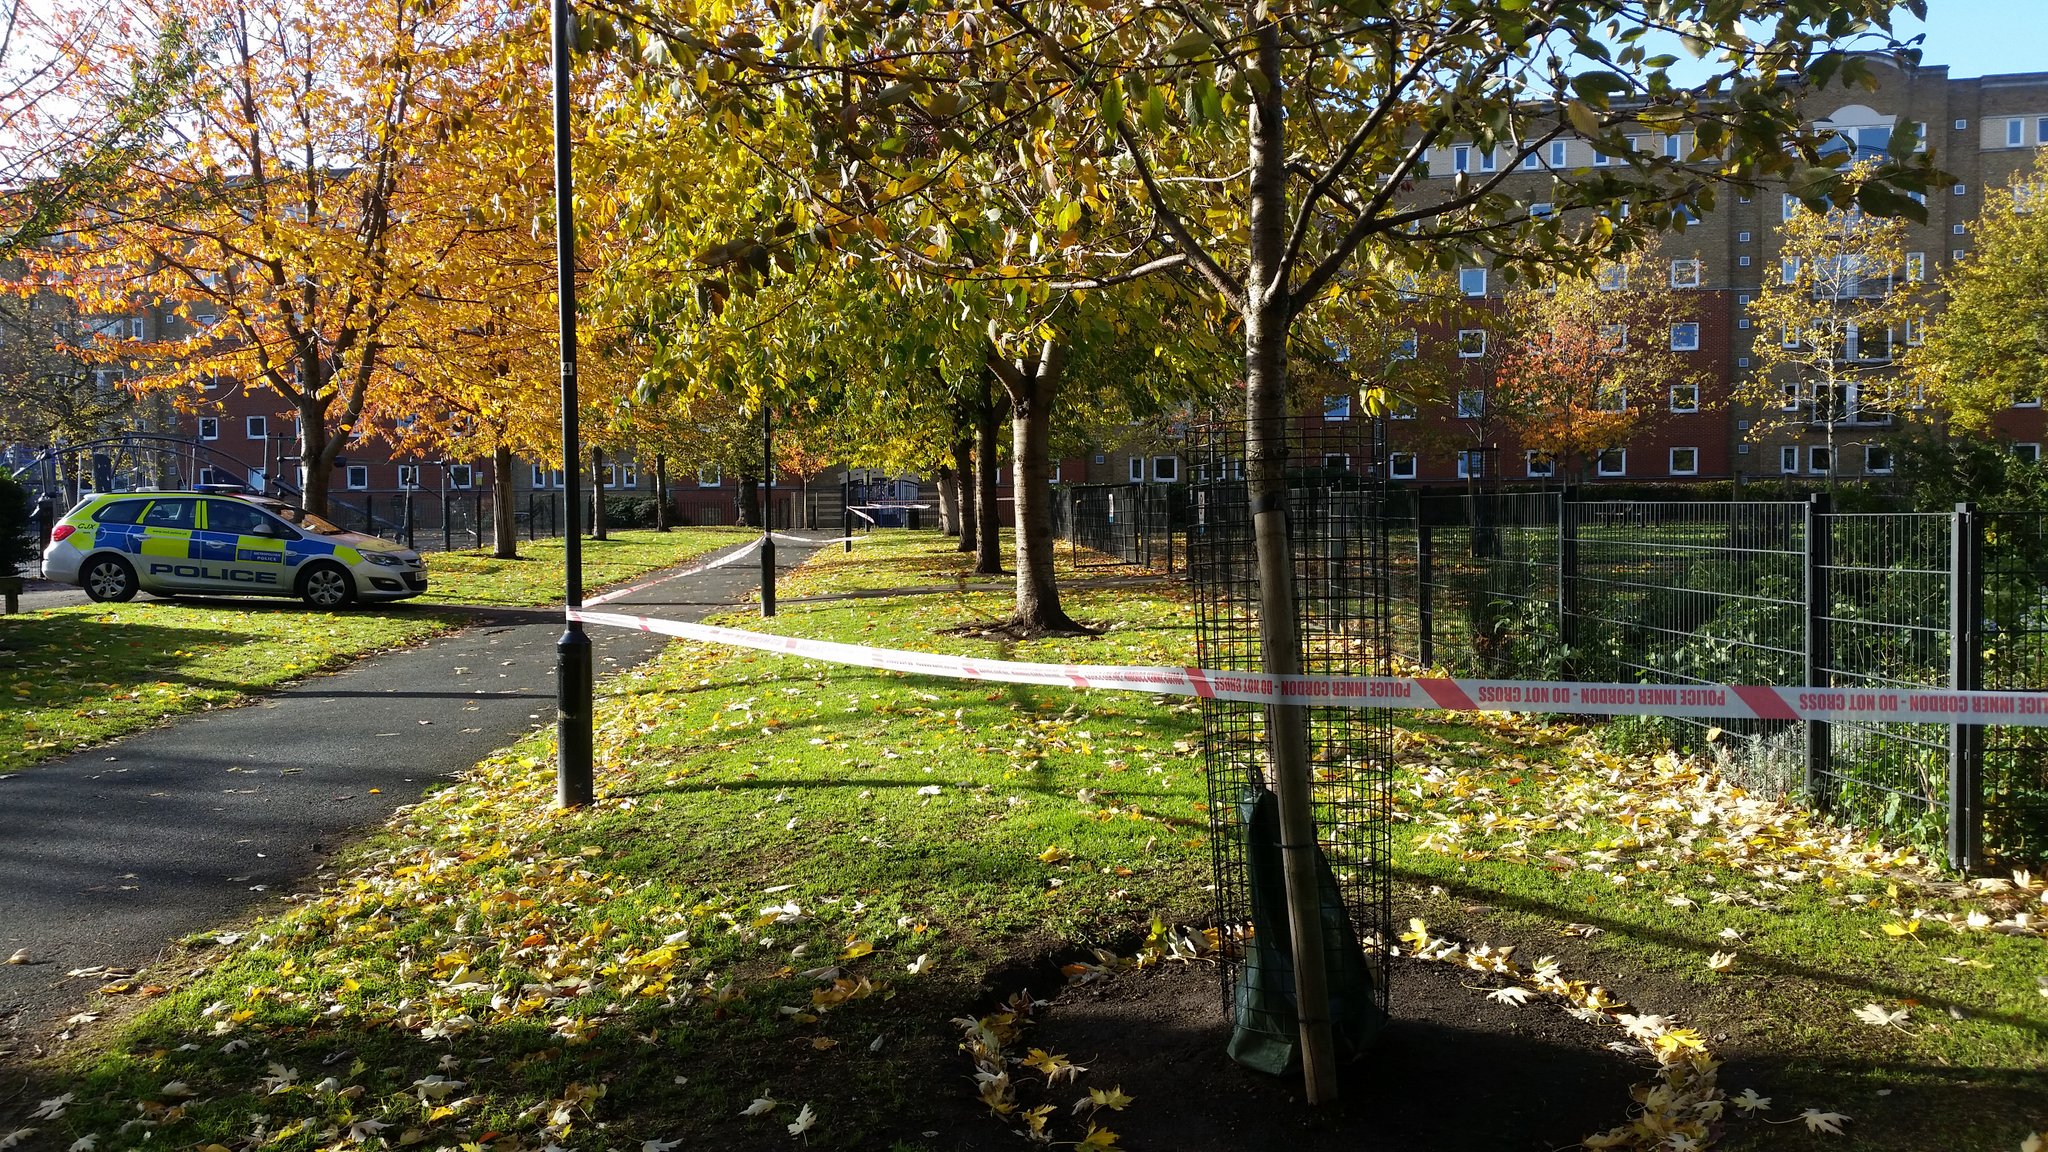 Police investigating ‘serious sexual assault’ in Tabard Gardens